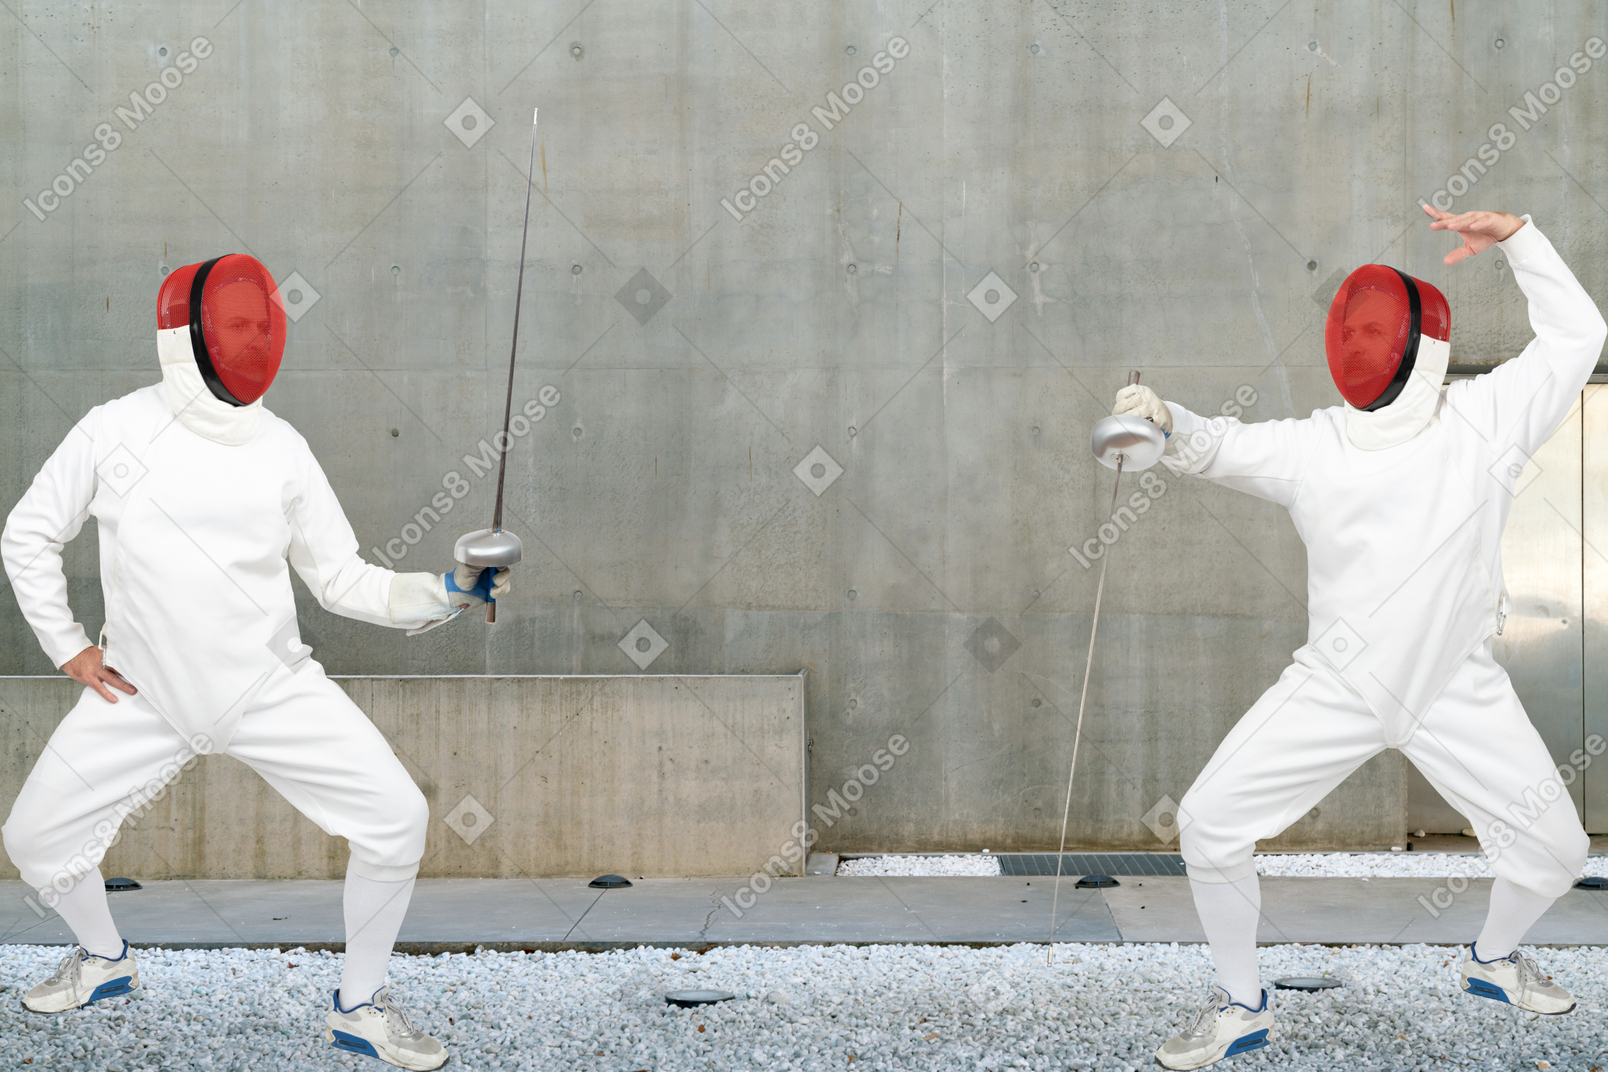 Men wearing fencing suits practicing with swords